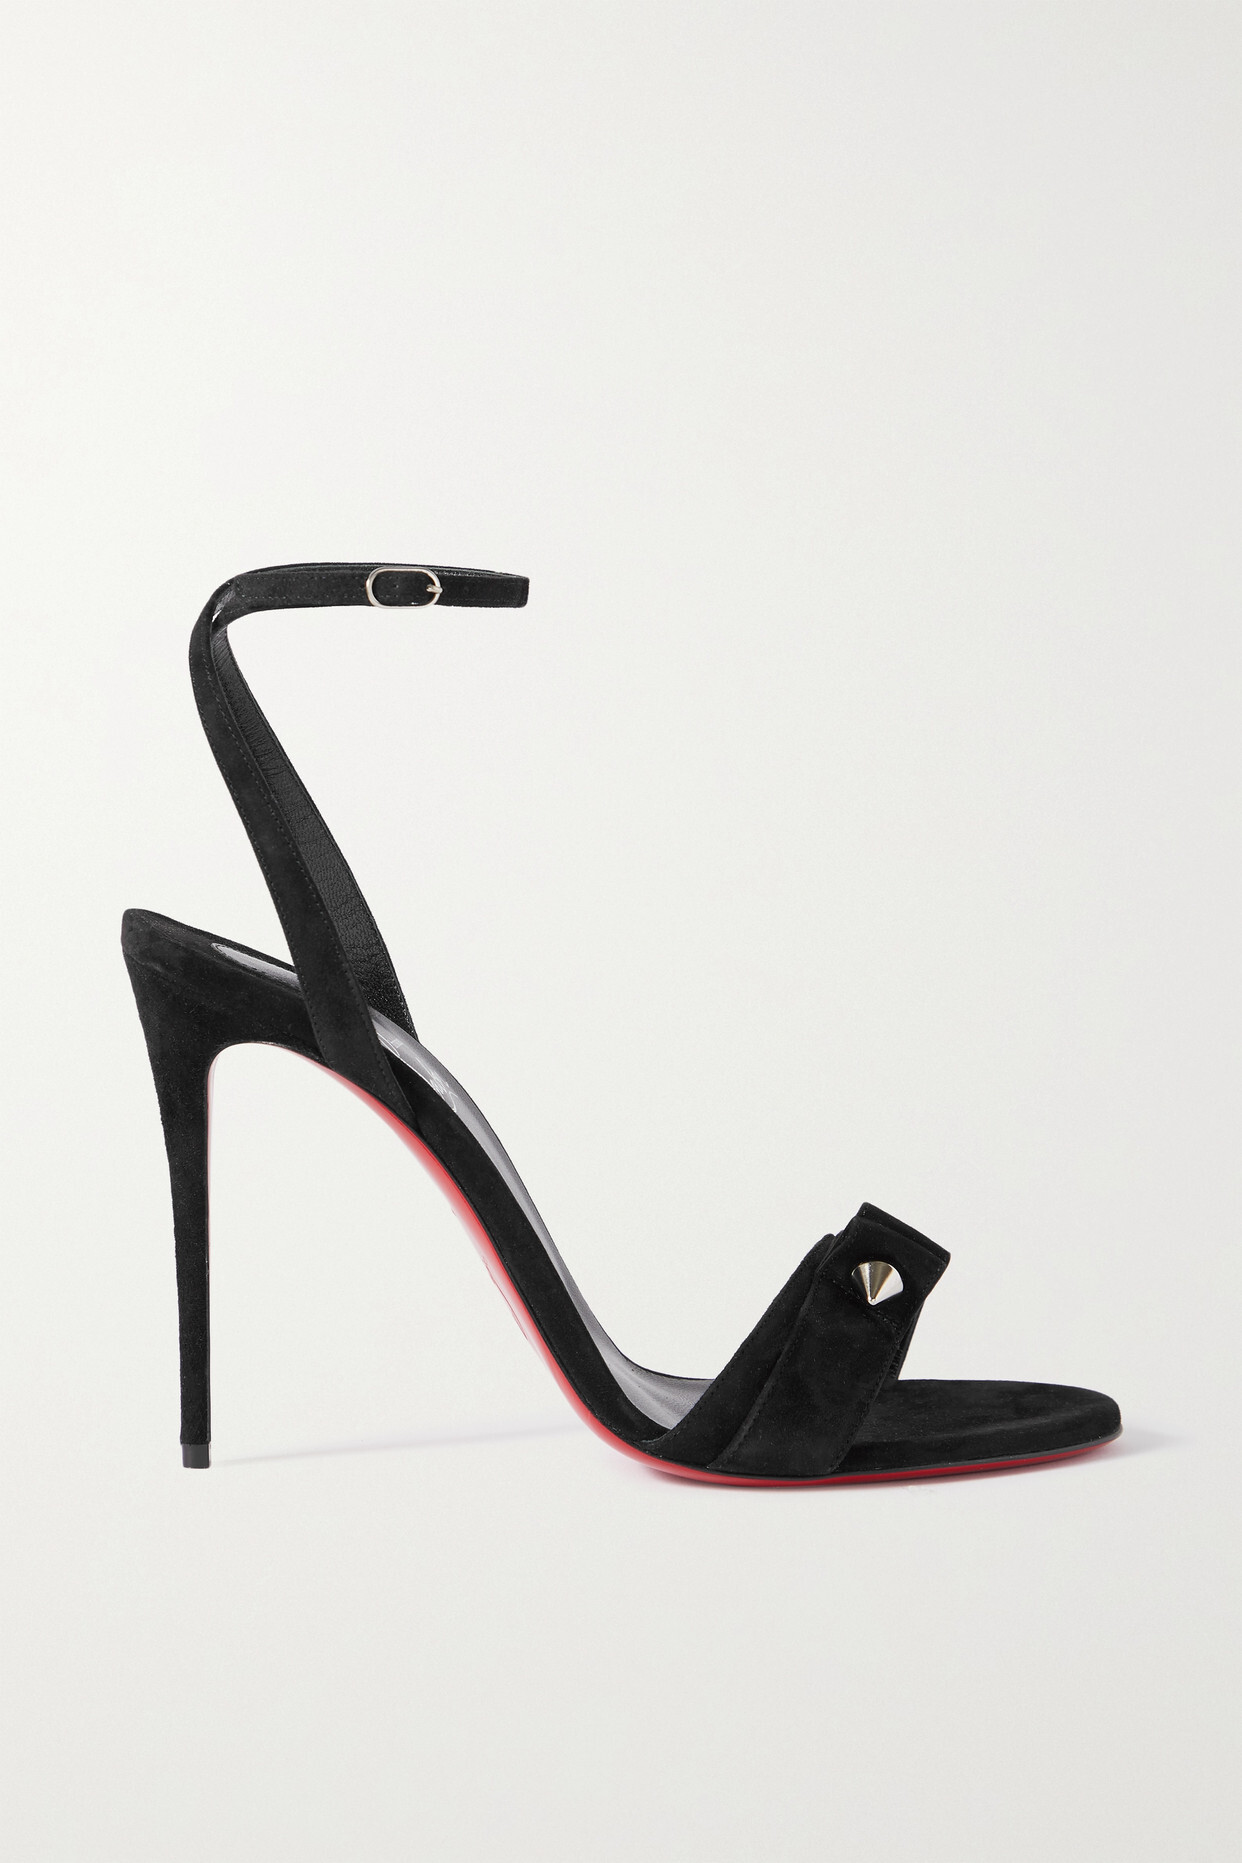 Christian Louboutin - Umberta 100 Spiked Suede Sandals - Black